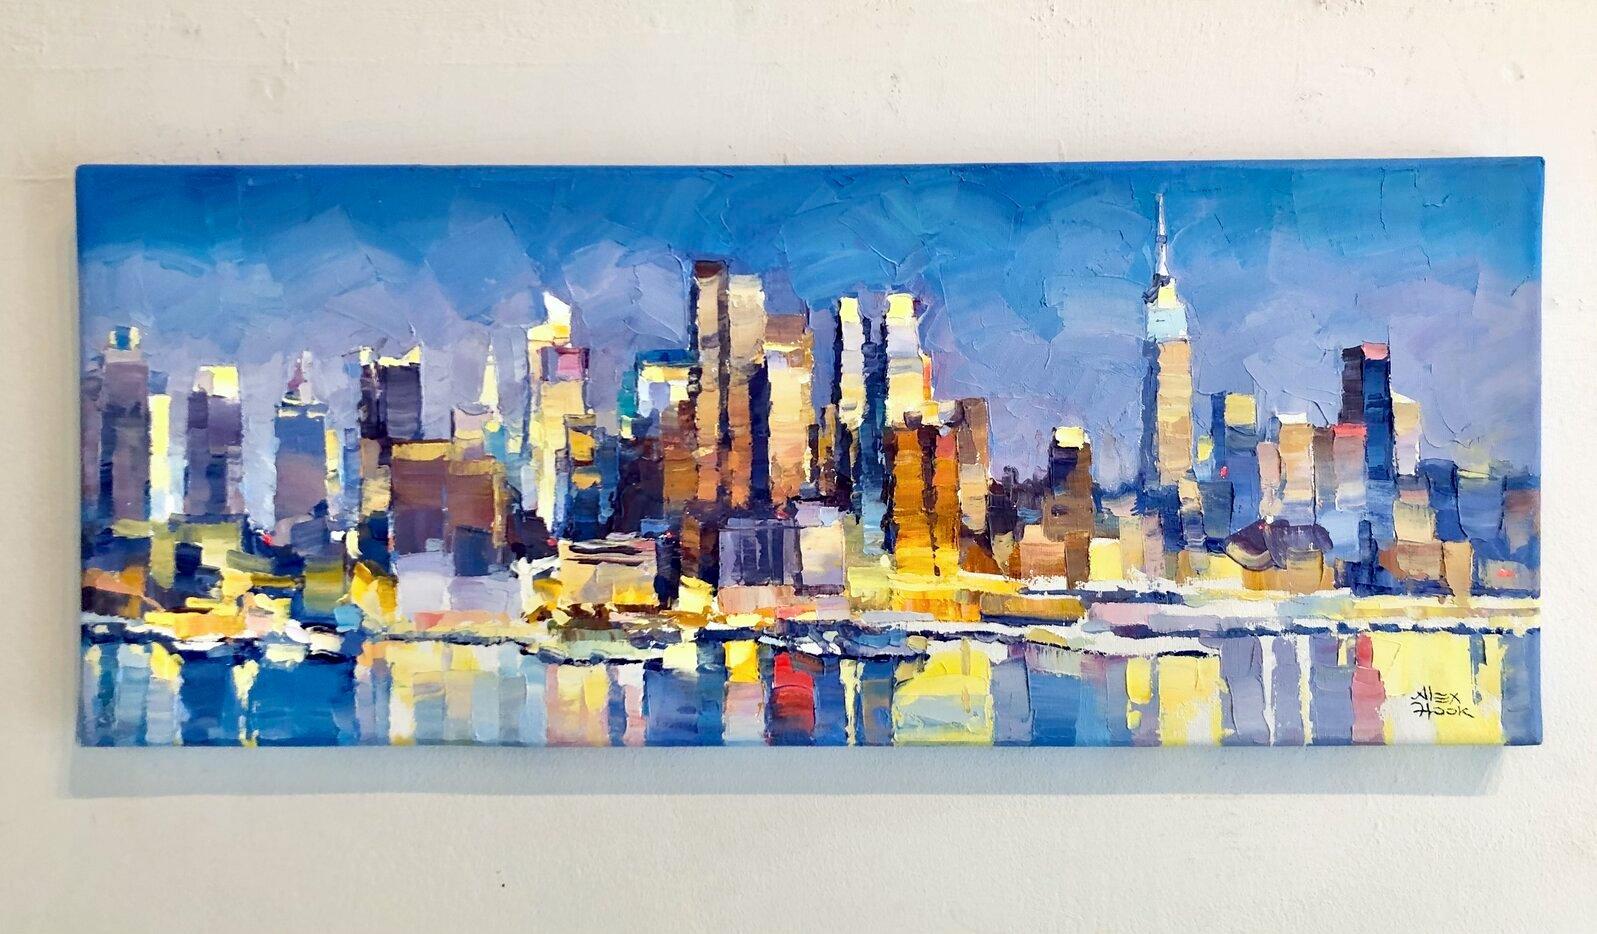 Manhattan Lights, NYC-original abstract cityscape oil painting-contemporary Art - Painting by Alex Hook Krioutchkov